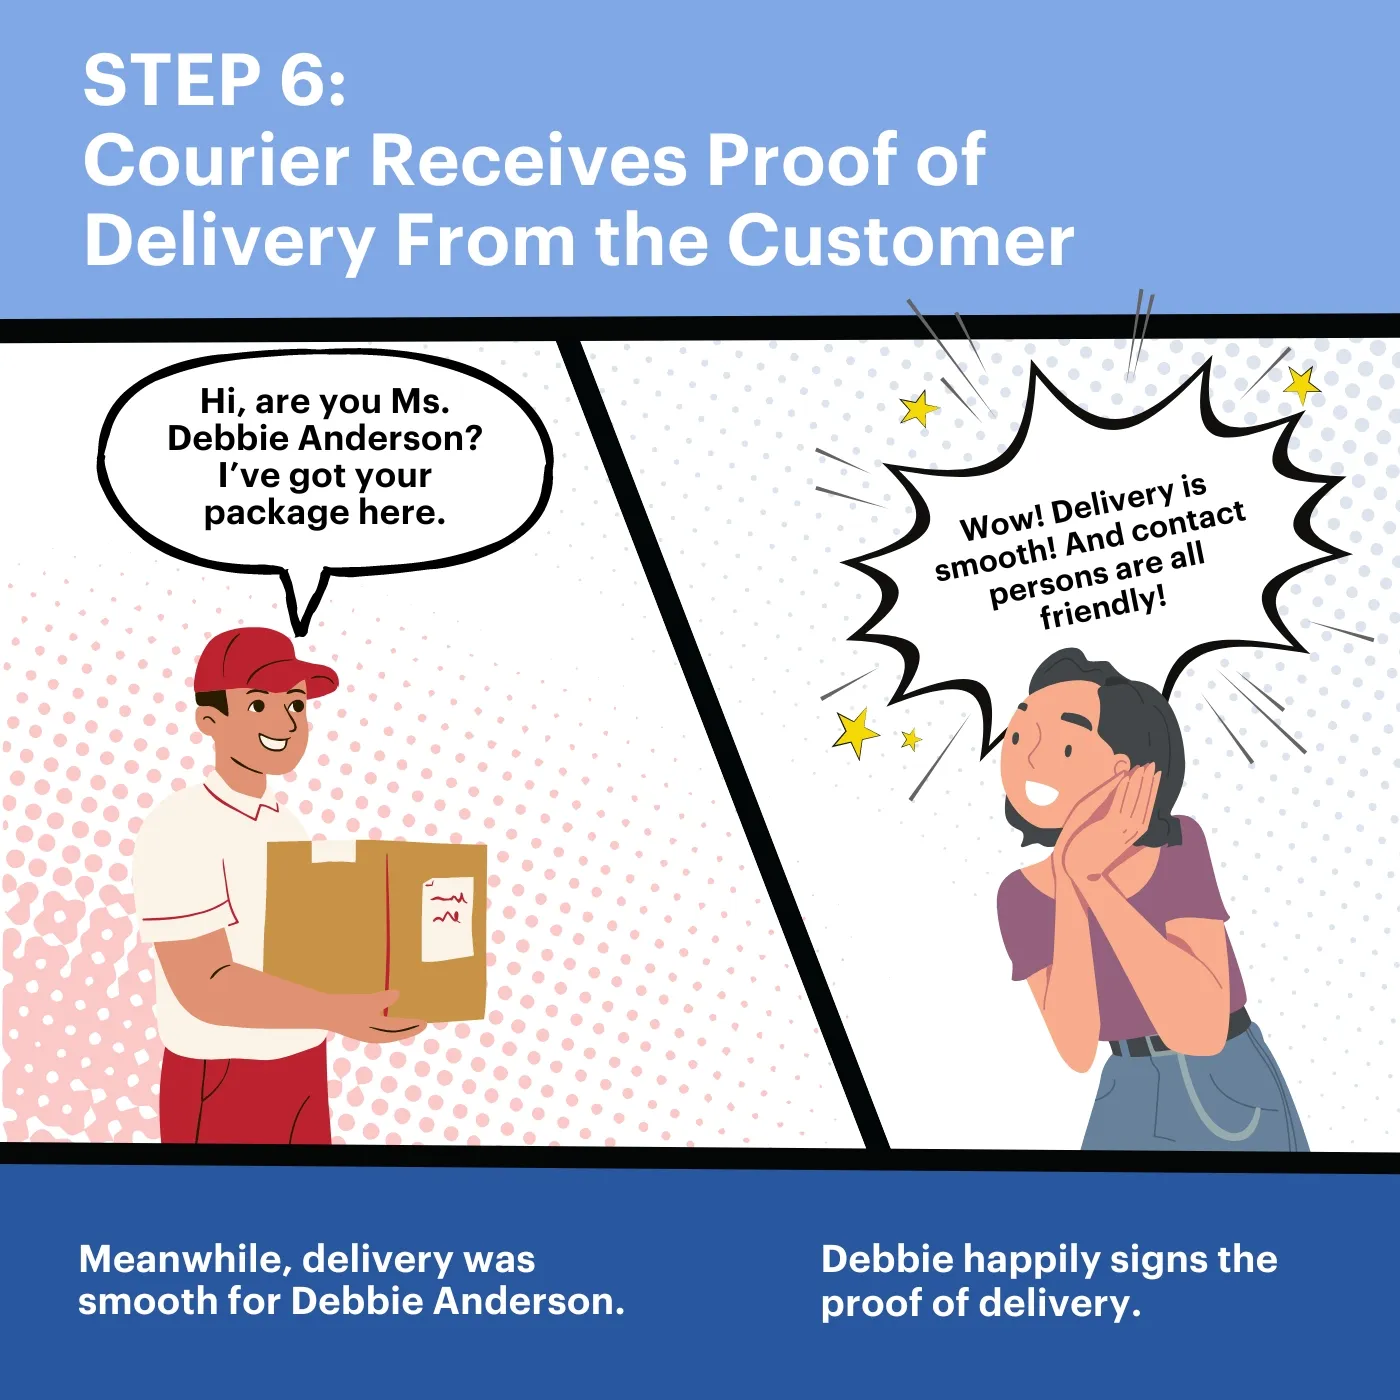 Image caption says: Courier Receives Proof of Delivery From the Customer